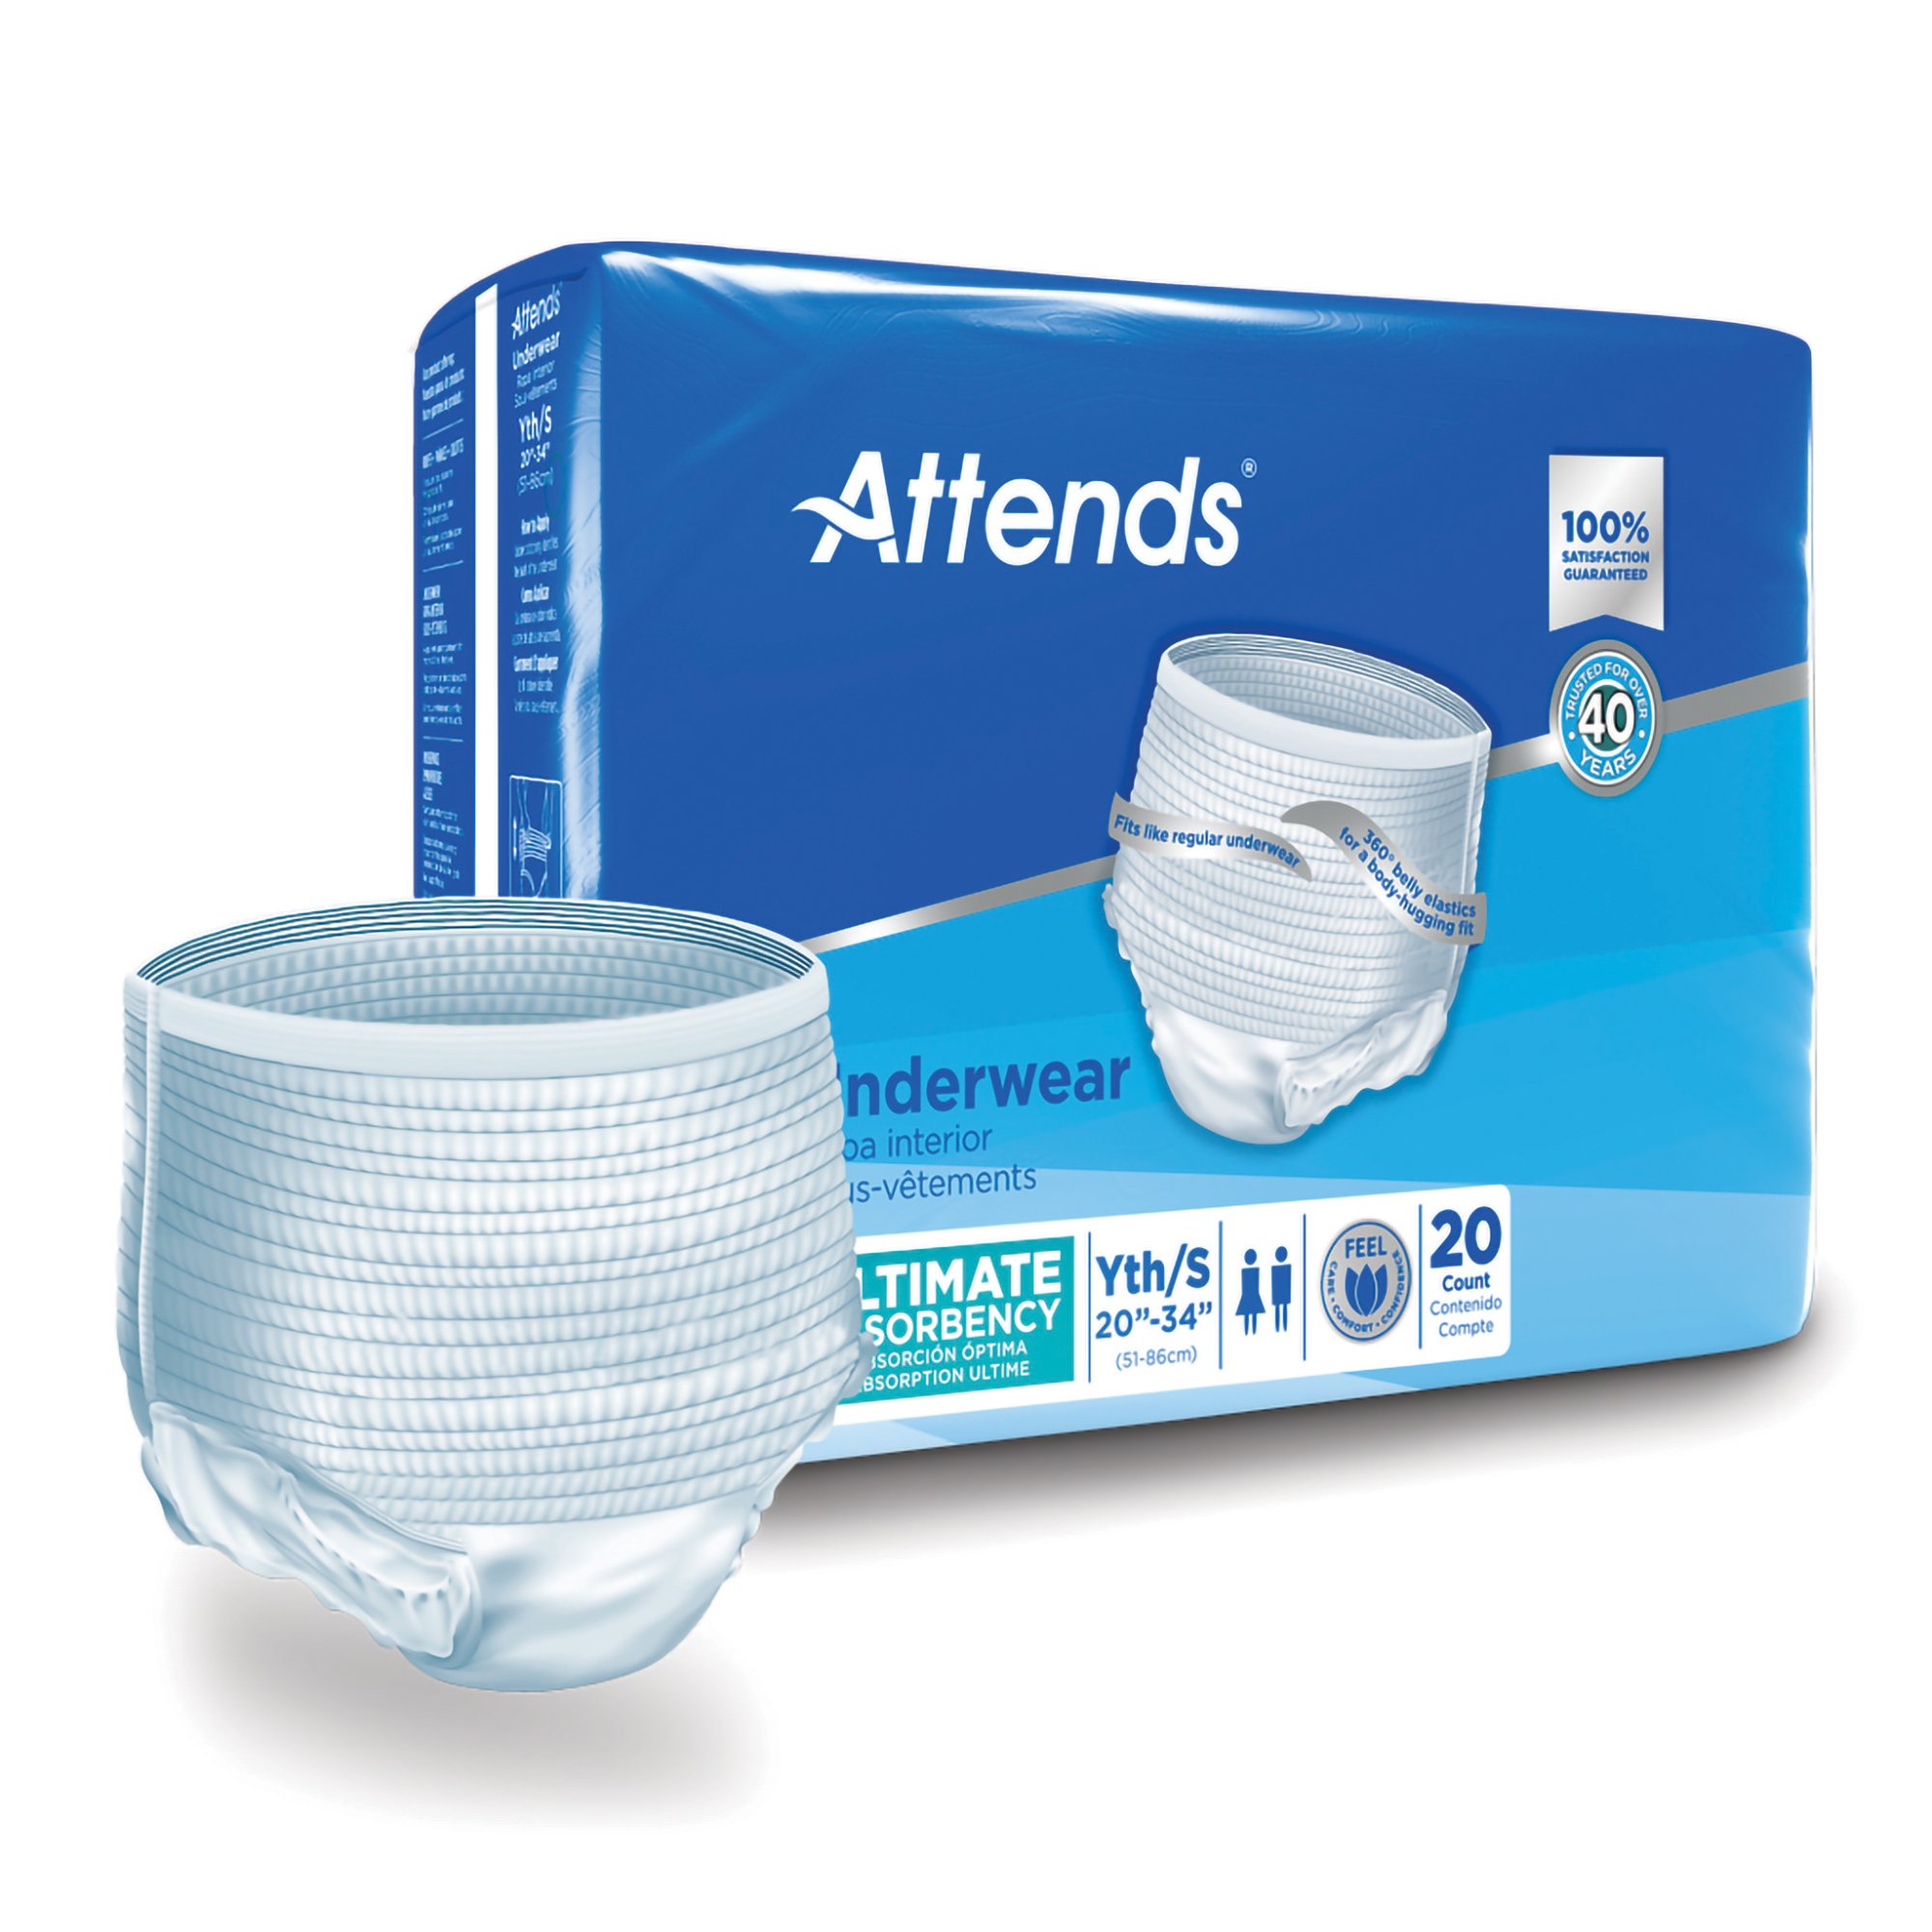 Attends Advanced Incontinence Underwear, Heavy Absorbency - Youth